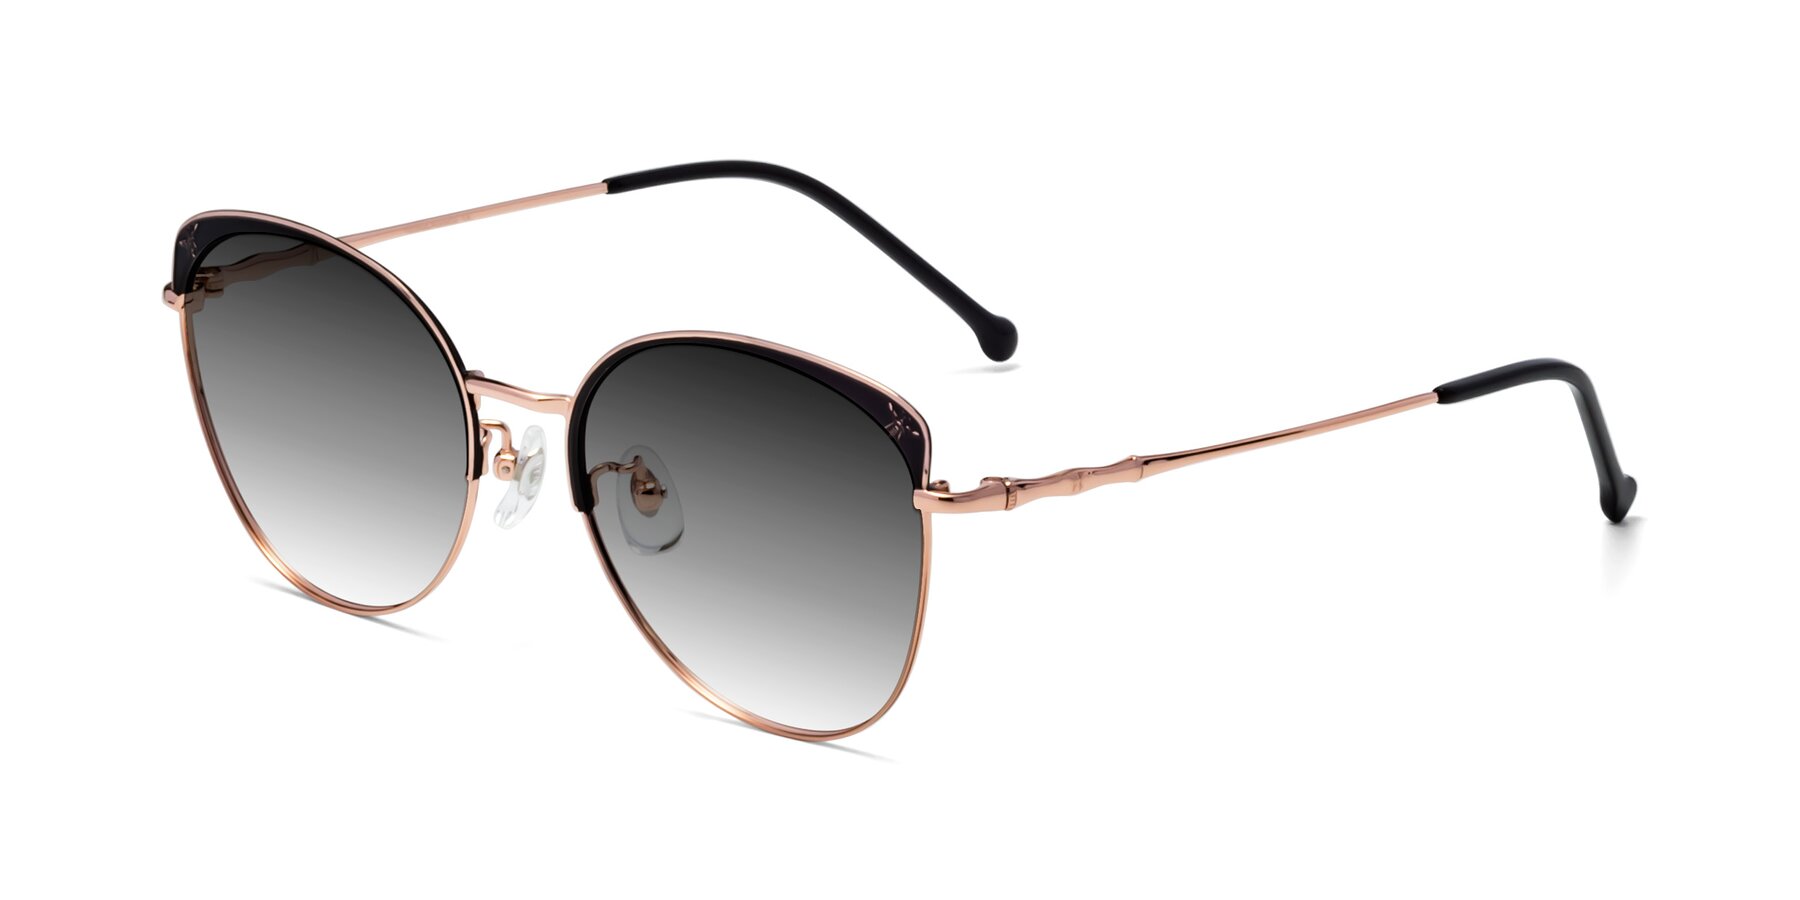 Angle of 18019 in Black-Rose Gold with Gray Gradient Lenses